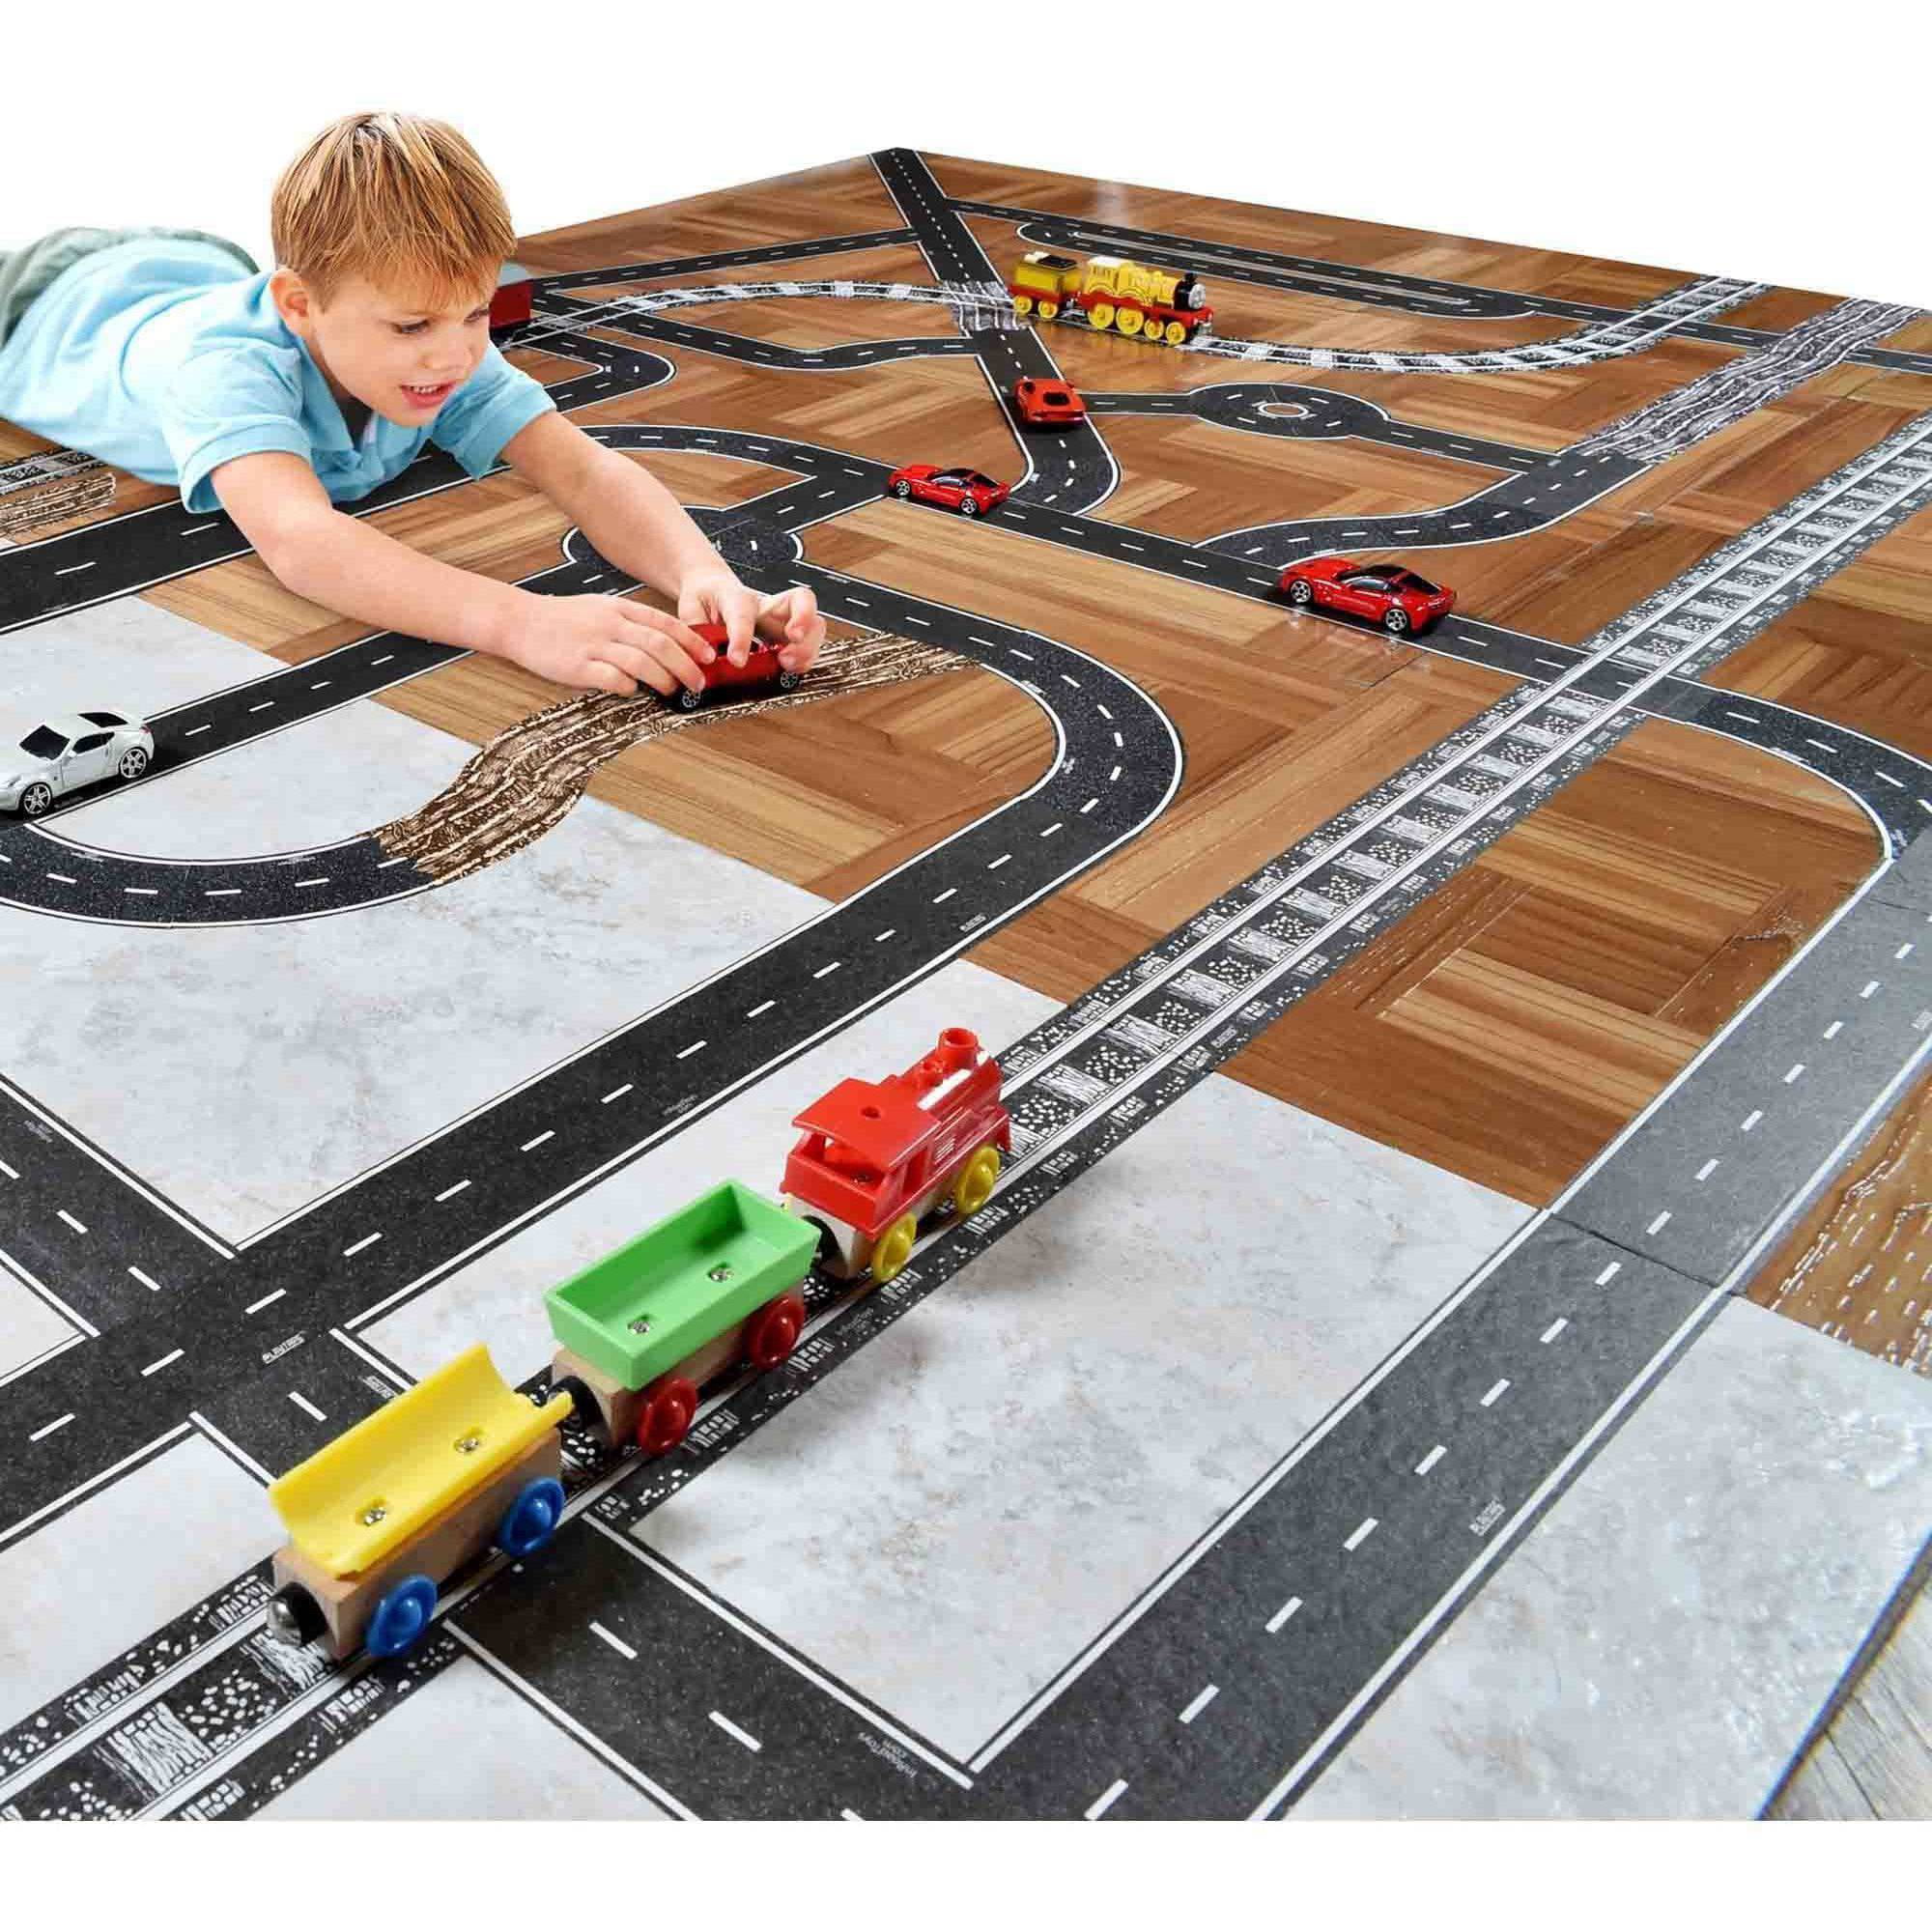 Playtape Black Road Tape Includes Street Curves, Tape Toy Car Track for Kids, Sticker Roll for Cars and Train Sets, 1 Roll of 30 ft x 4 inch Road + 12